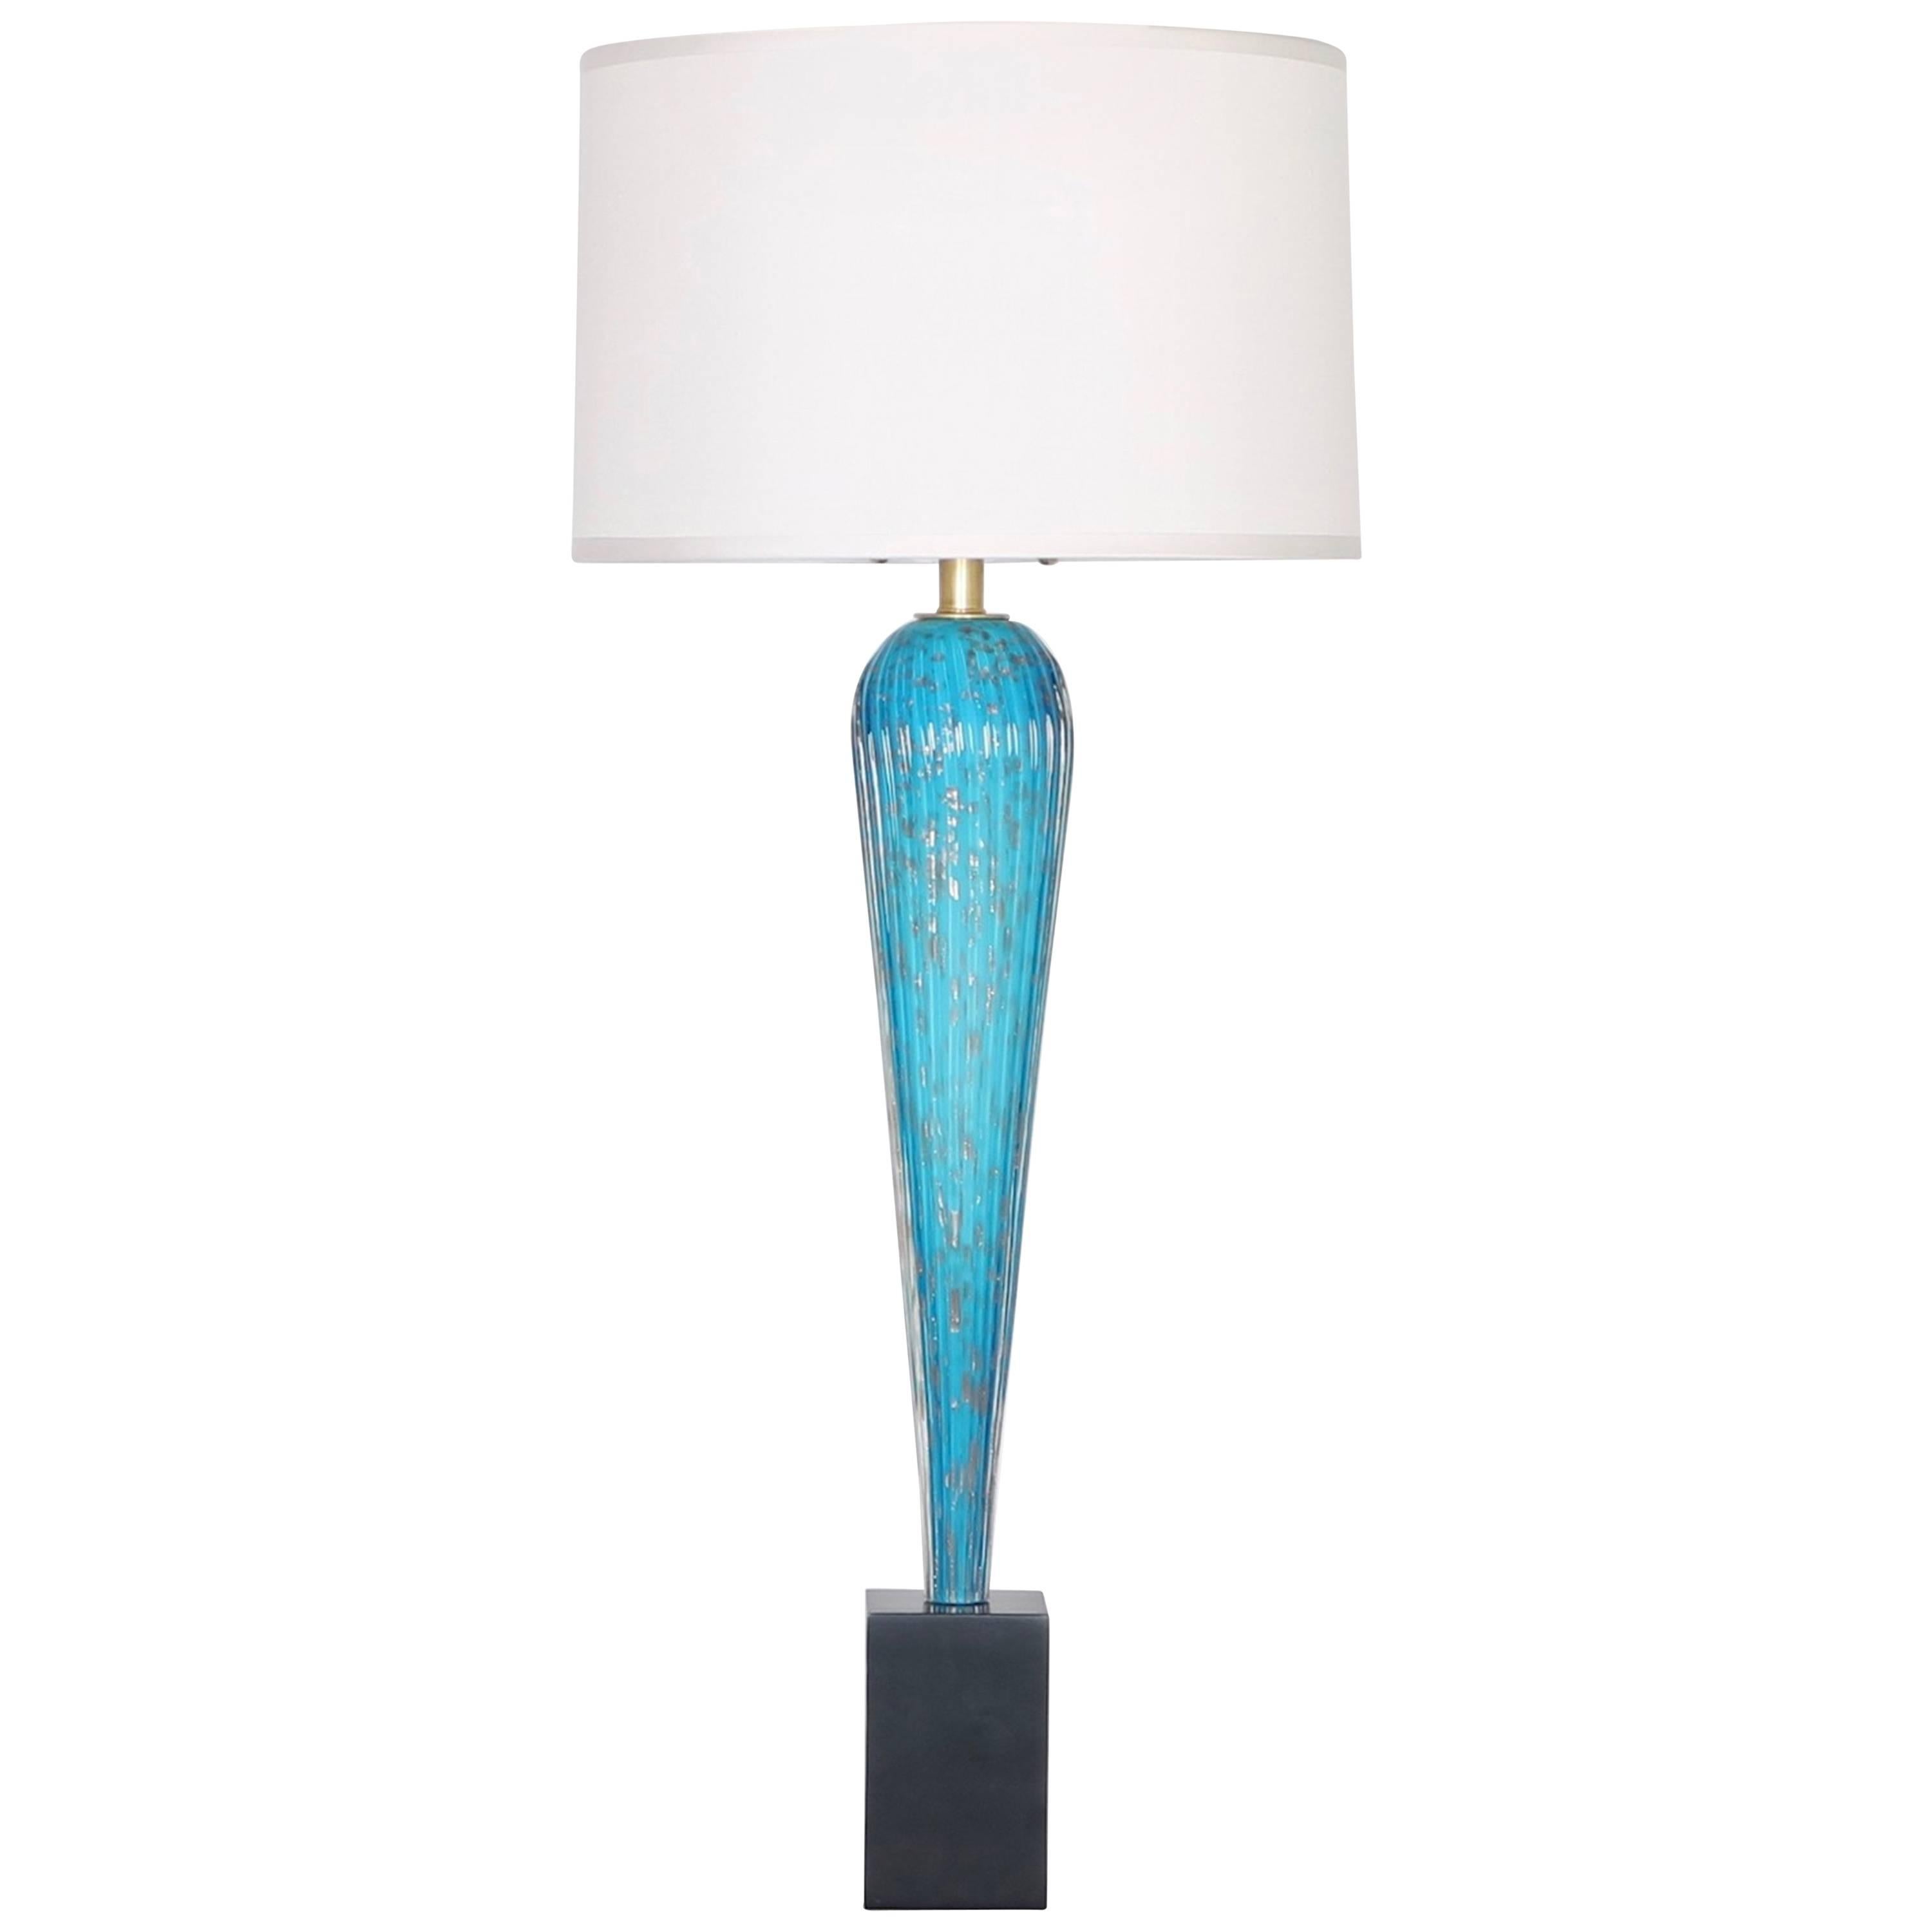 Barovier Table Lamp in Copper Infused Blue and White Murano Glass